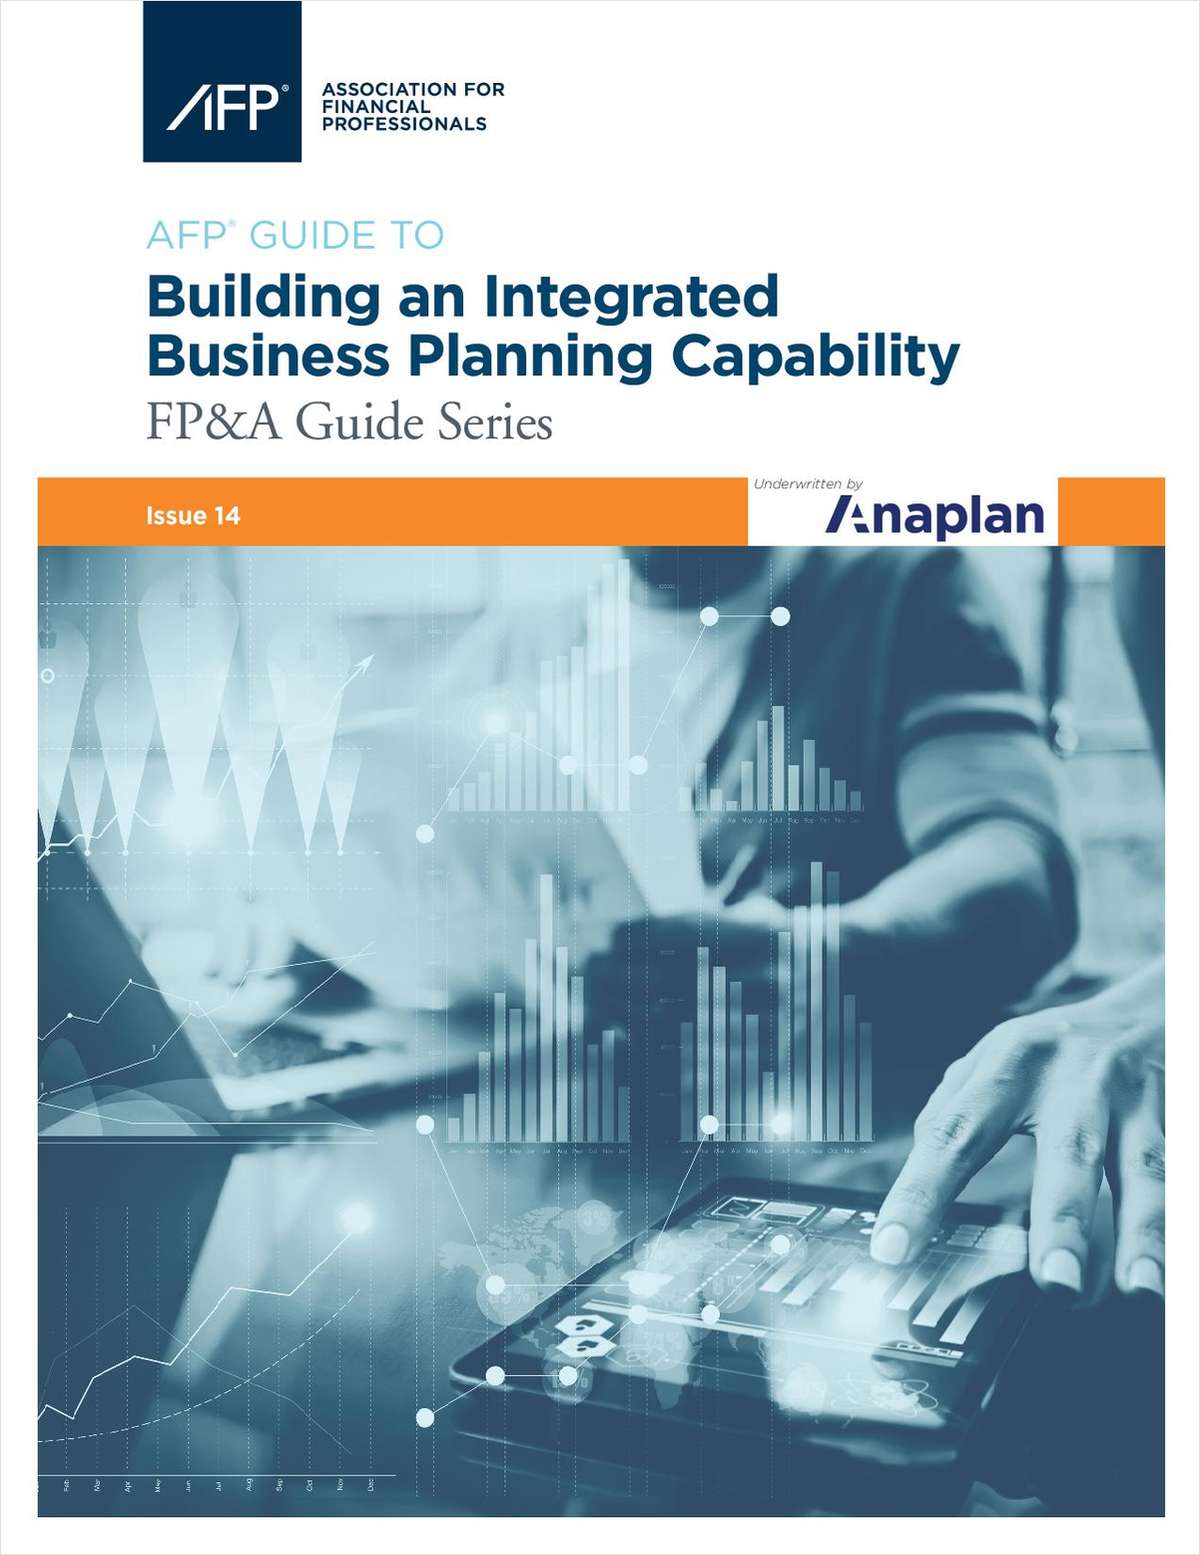 Building an Integrated Business Planning Capability